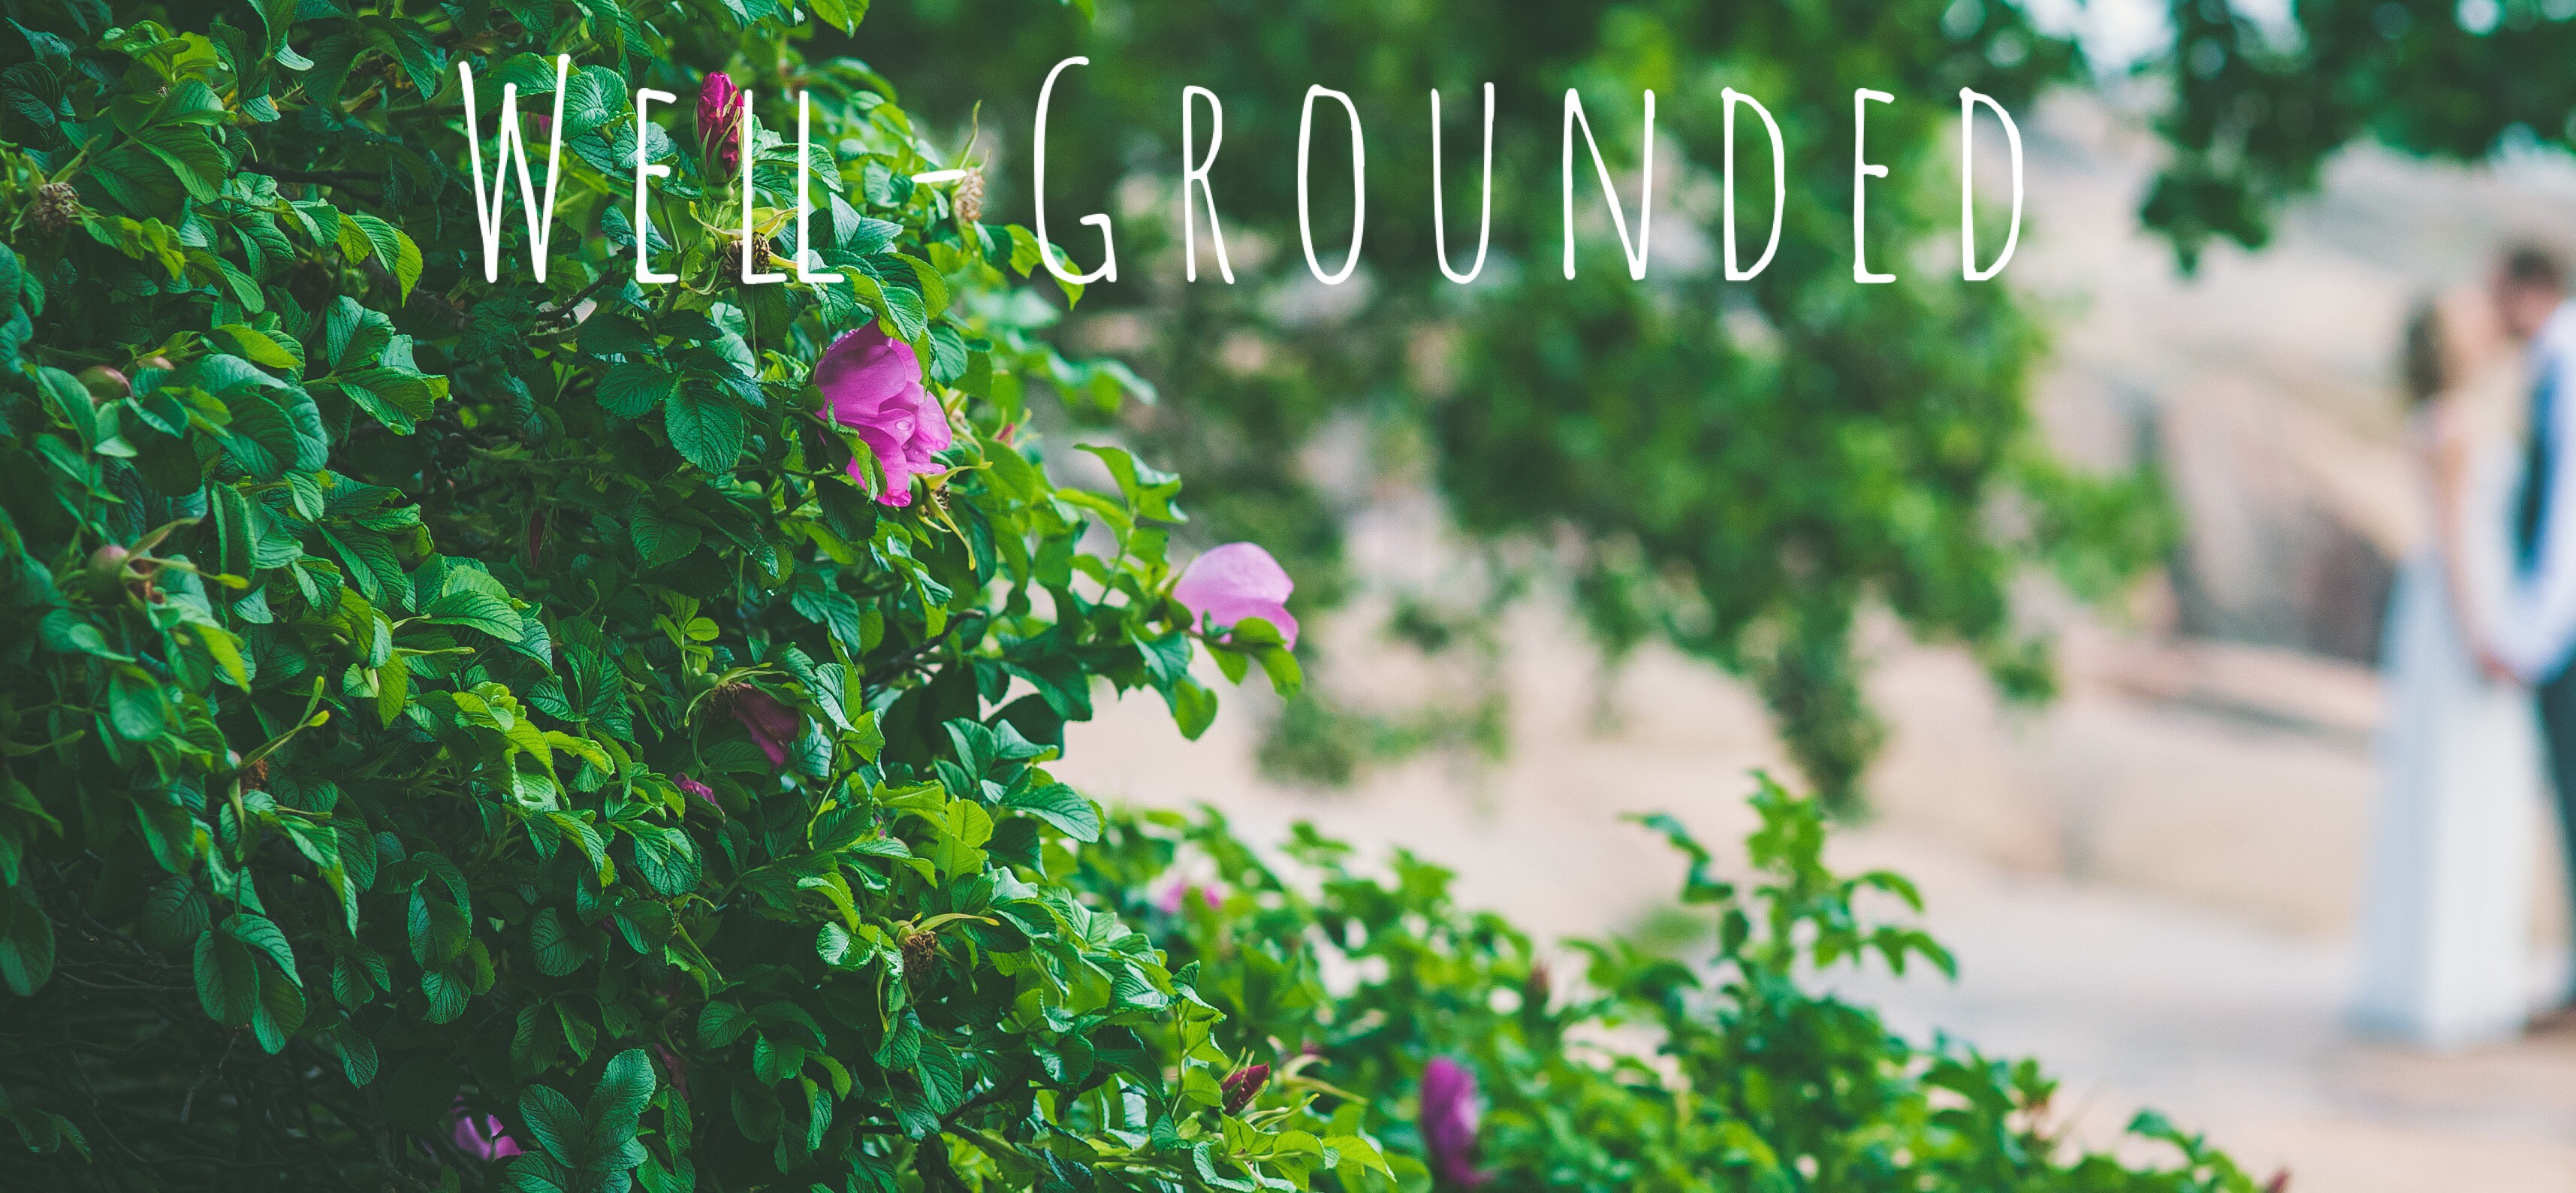 Well-Grounded